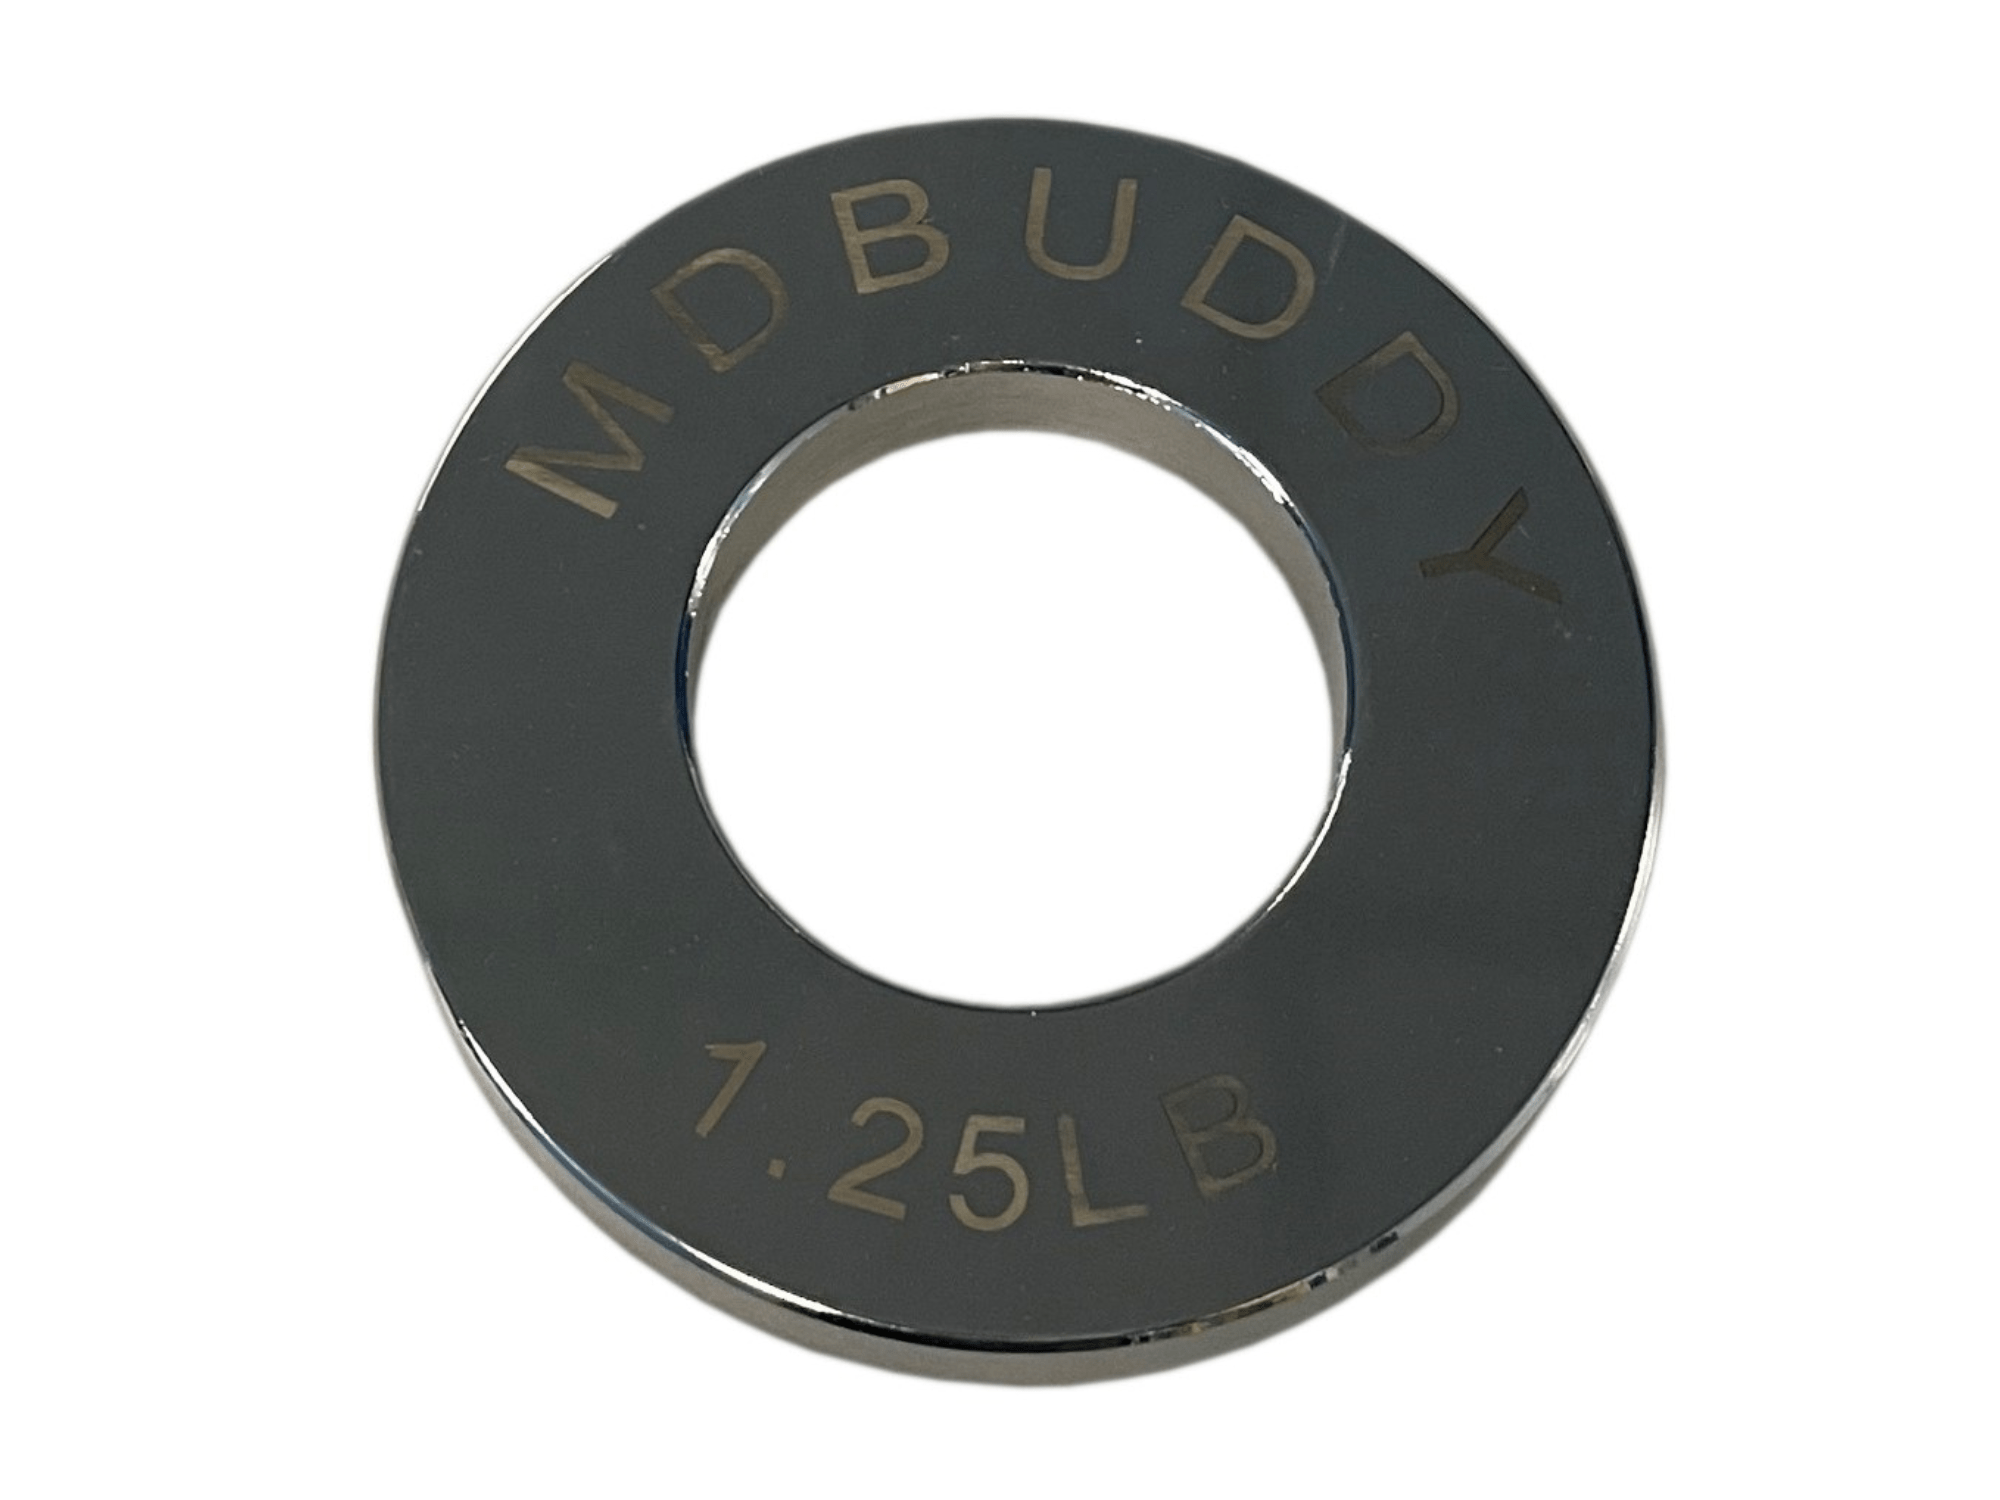 MD Buddy Olympic Steel Fractional Plate-Fractional Plates-MD Buddy-3